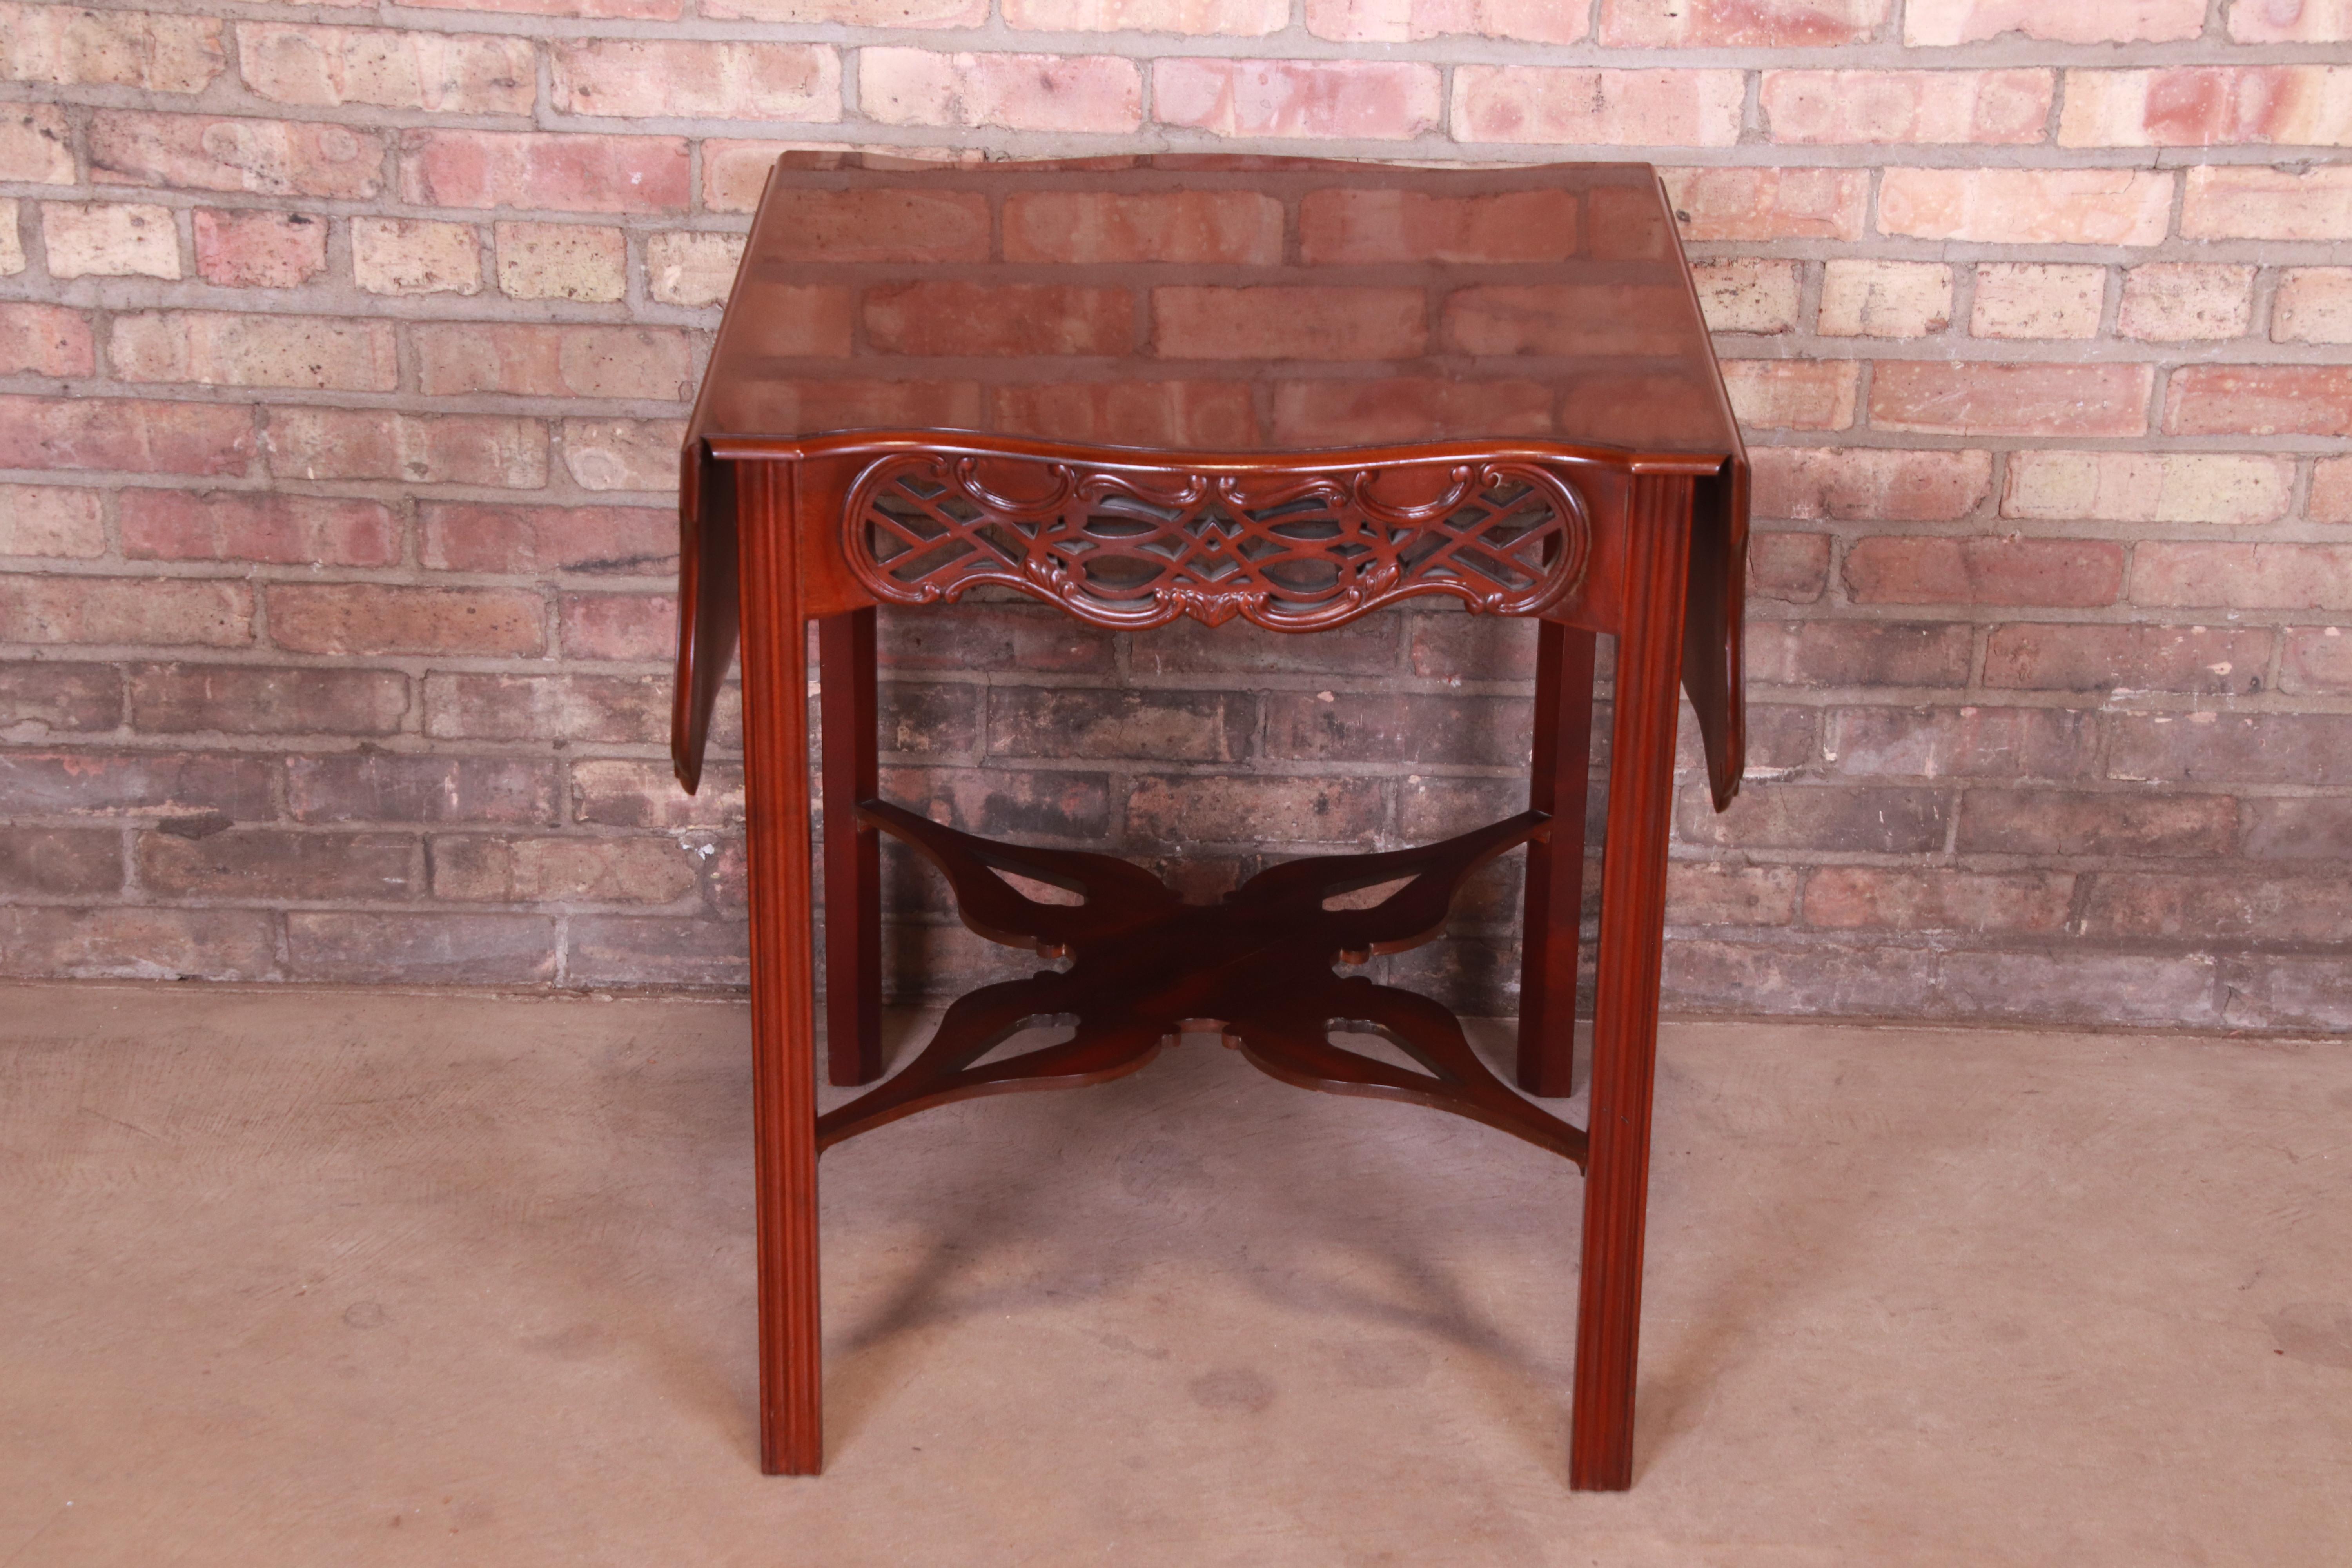 Baker Furniture Historic Charleston Collection Carved Mahogany Pembroke Table In Good Condition For Sale In South Bend, IN